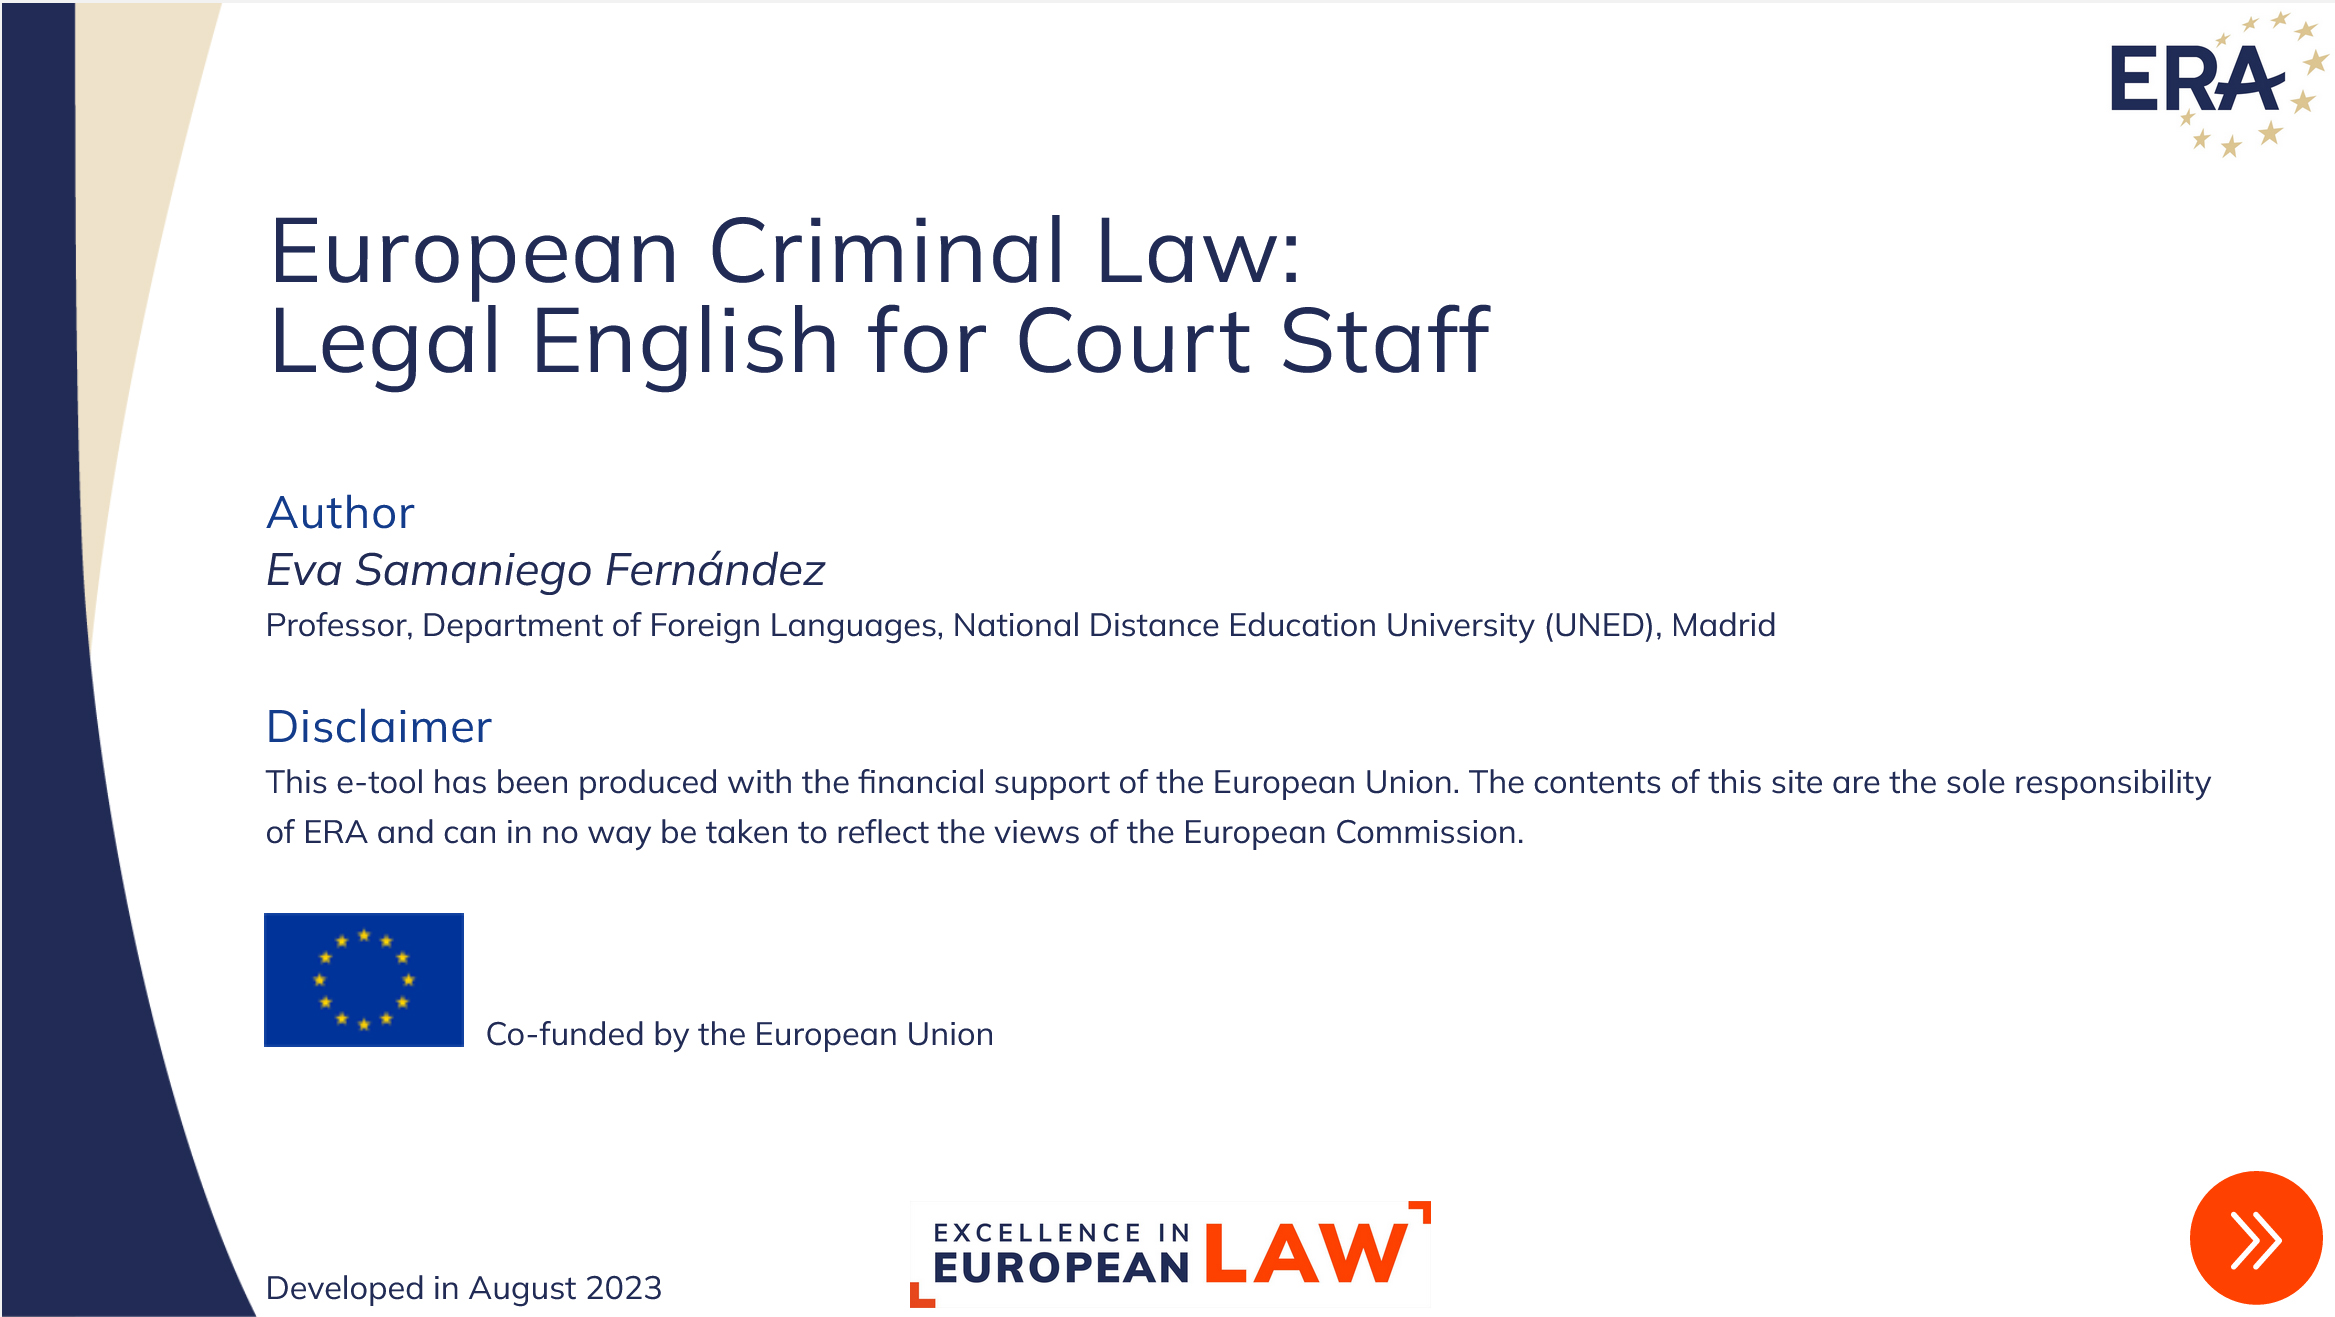 e-Tool on European Criminal Law: Legal English for Court Staff